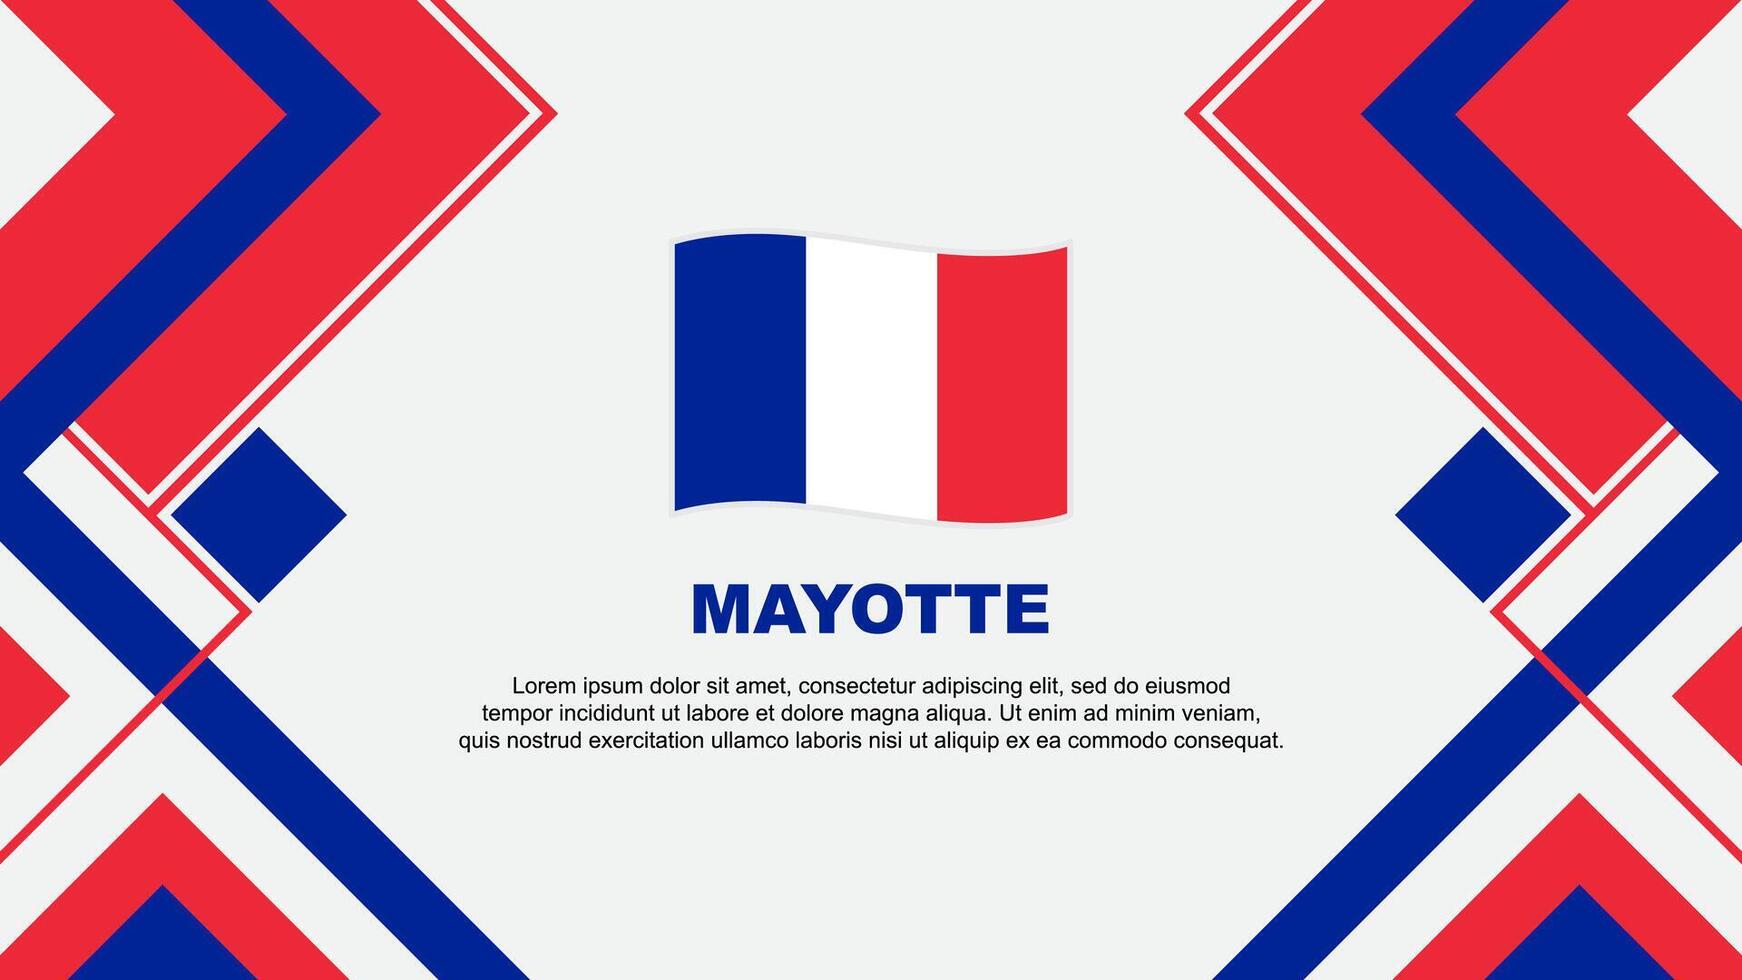 Mayotte Flag Abstract Background Design Template. Mayotte Independence Day Banner Wallpaper Vector Illustration. Banner